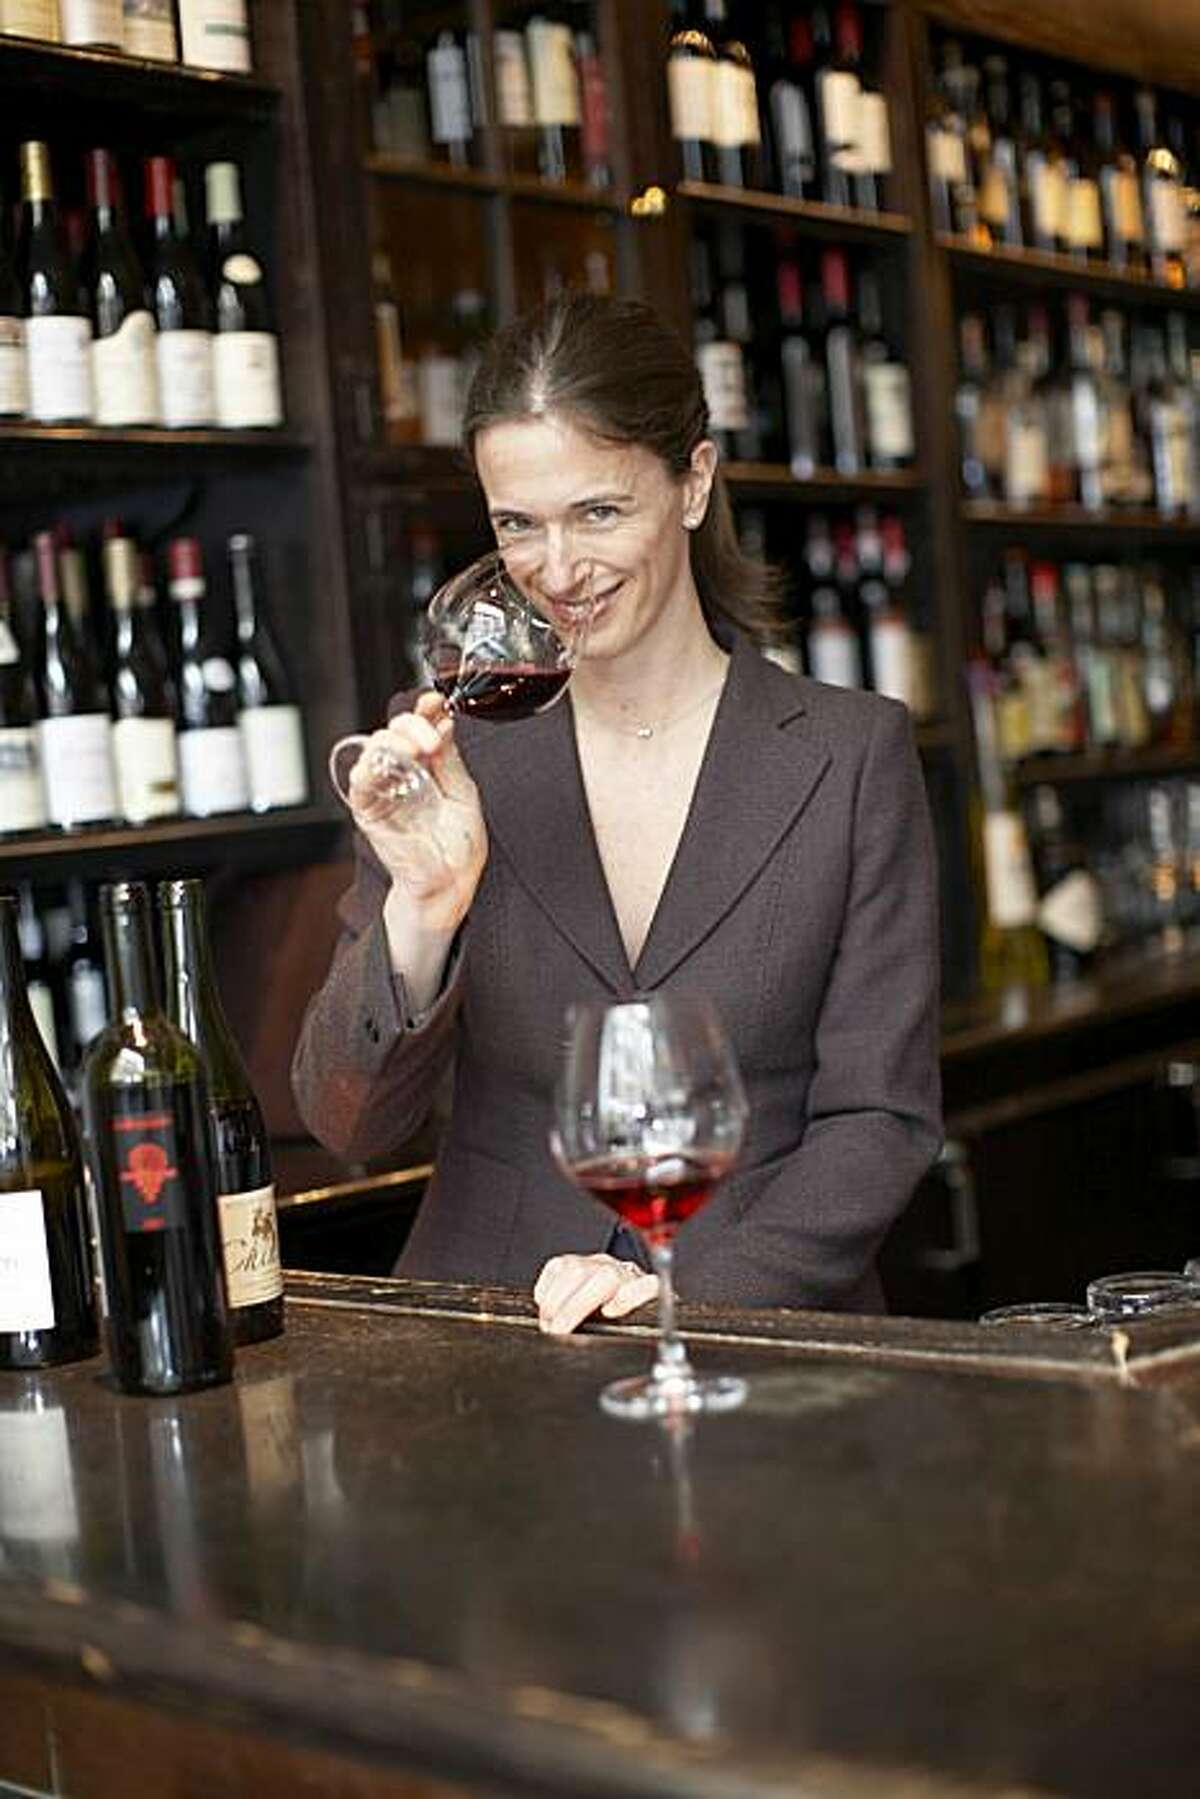 Juliette Pope, wine director at Gramercy Tavern restaurant in New York, NY. Pope is one of a group of New York sommeliers trying to find more California wines to place on lists.